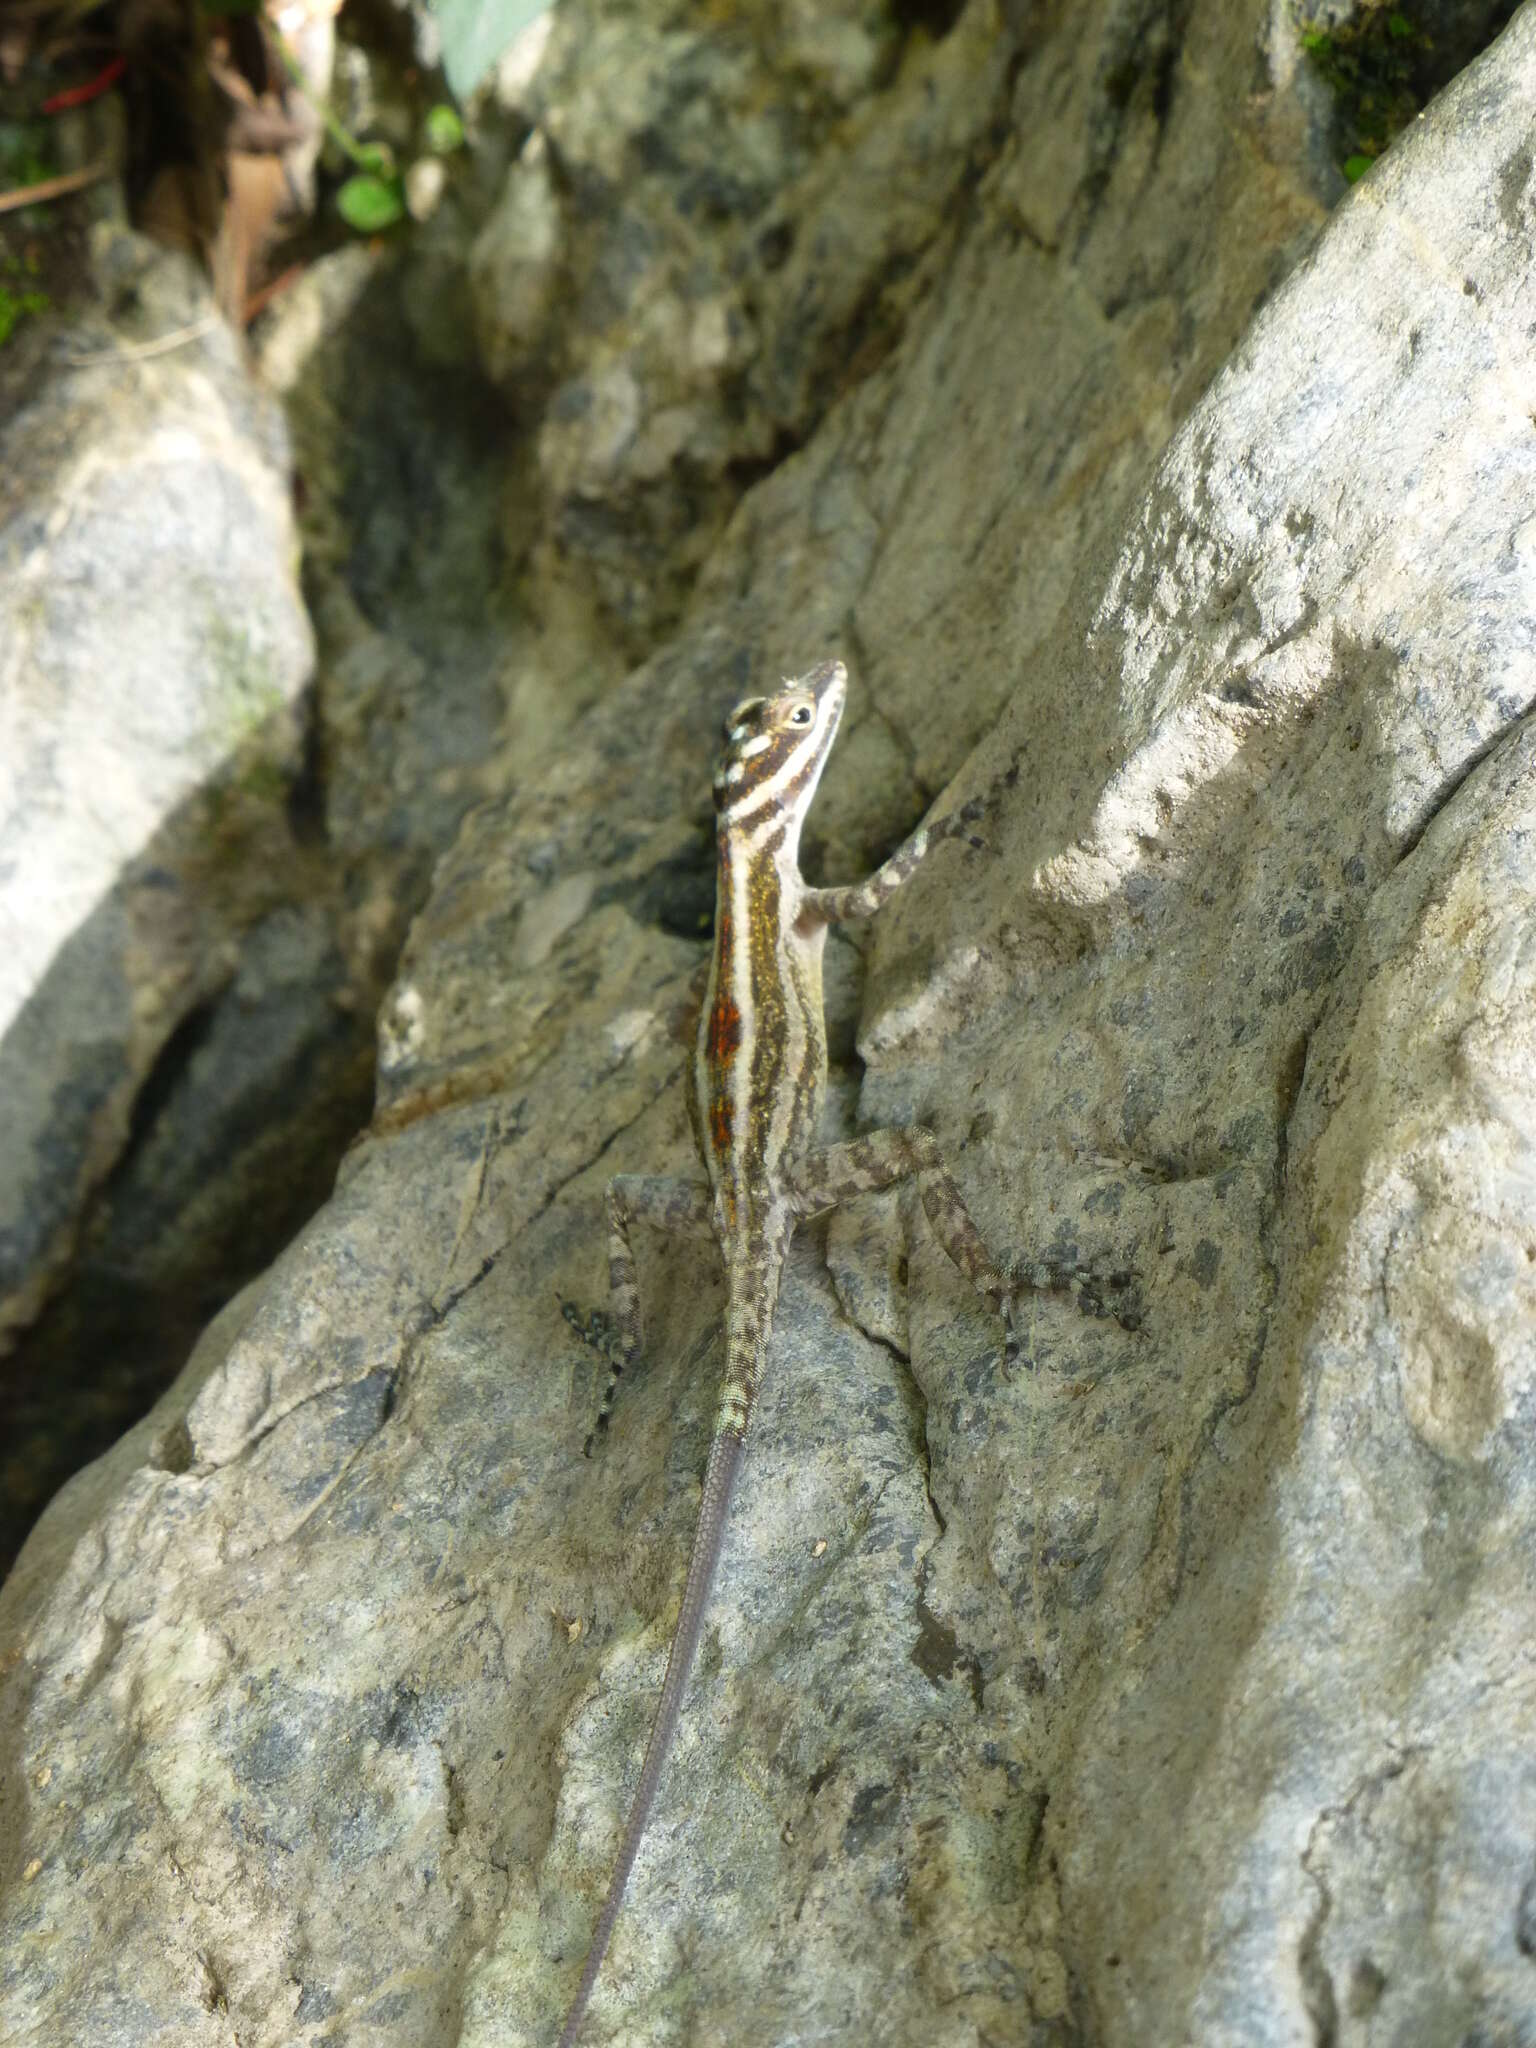 Image of Cave Anole